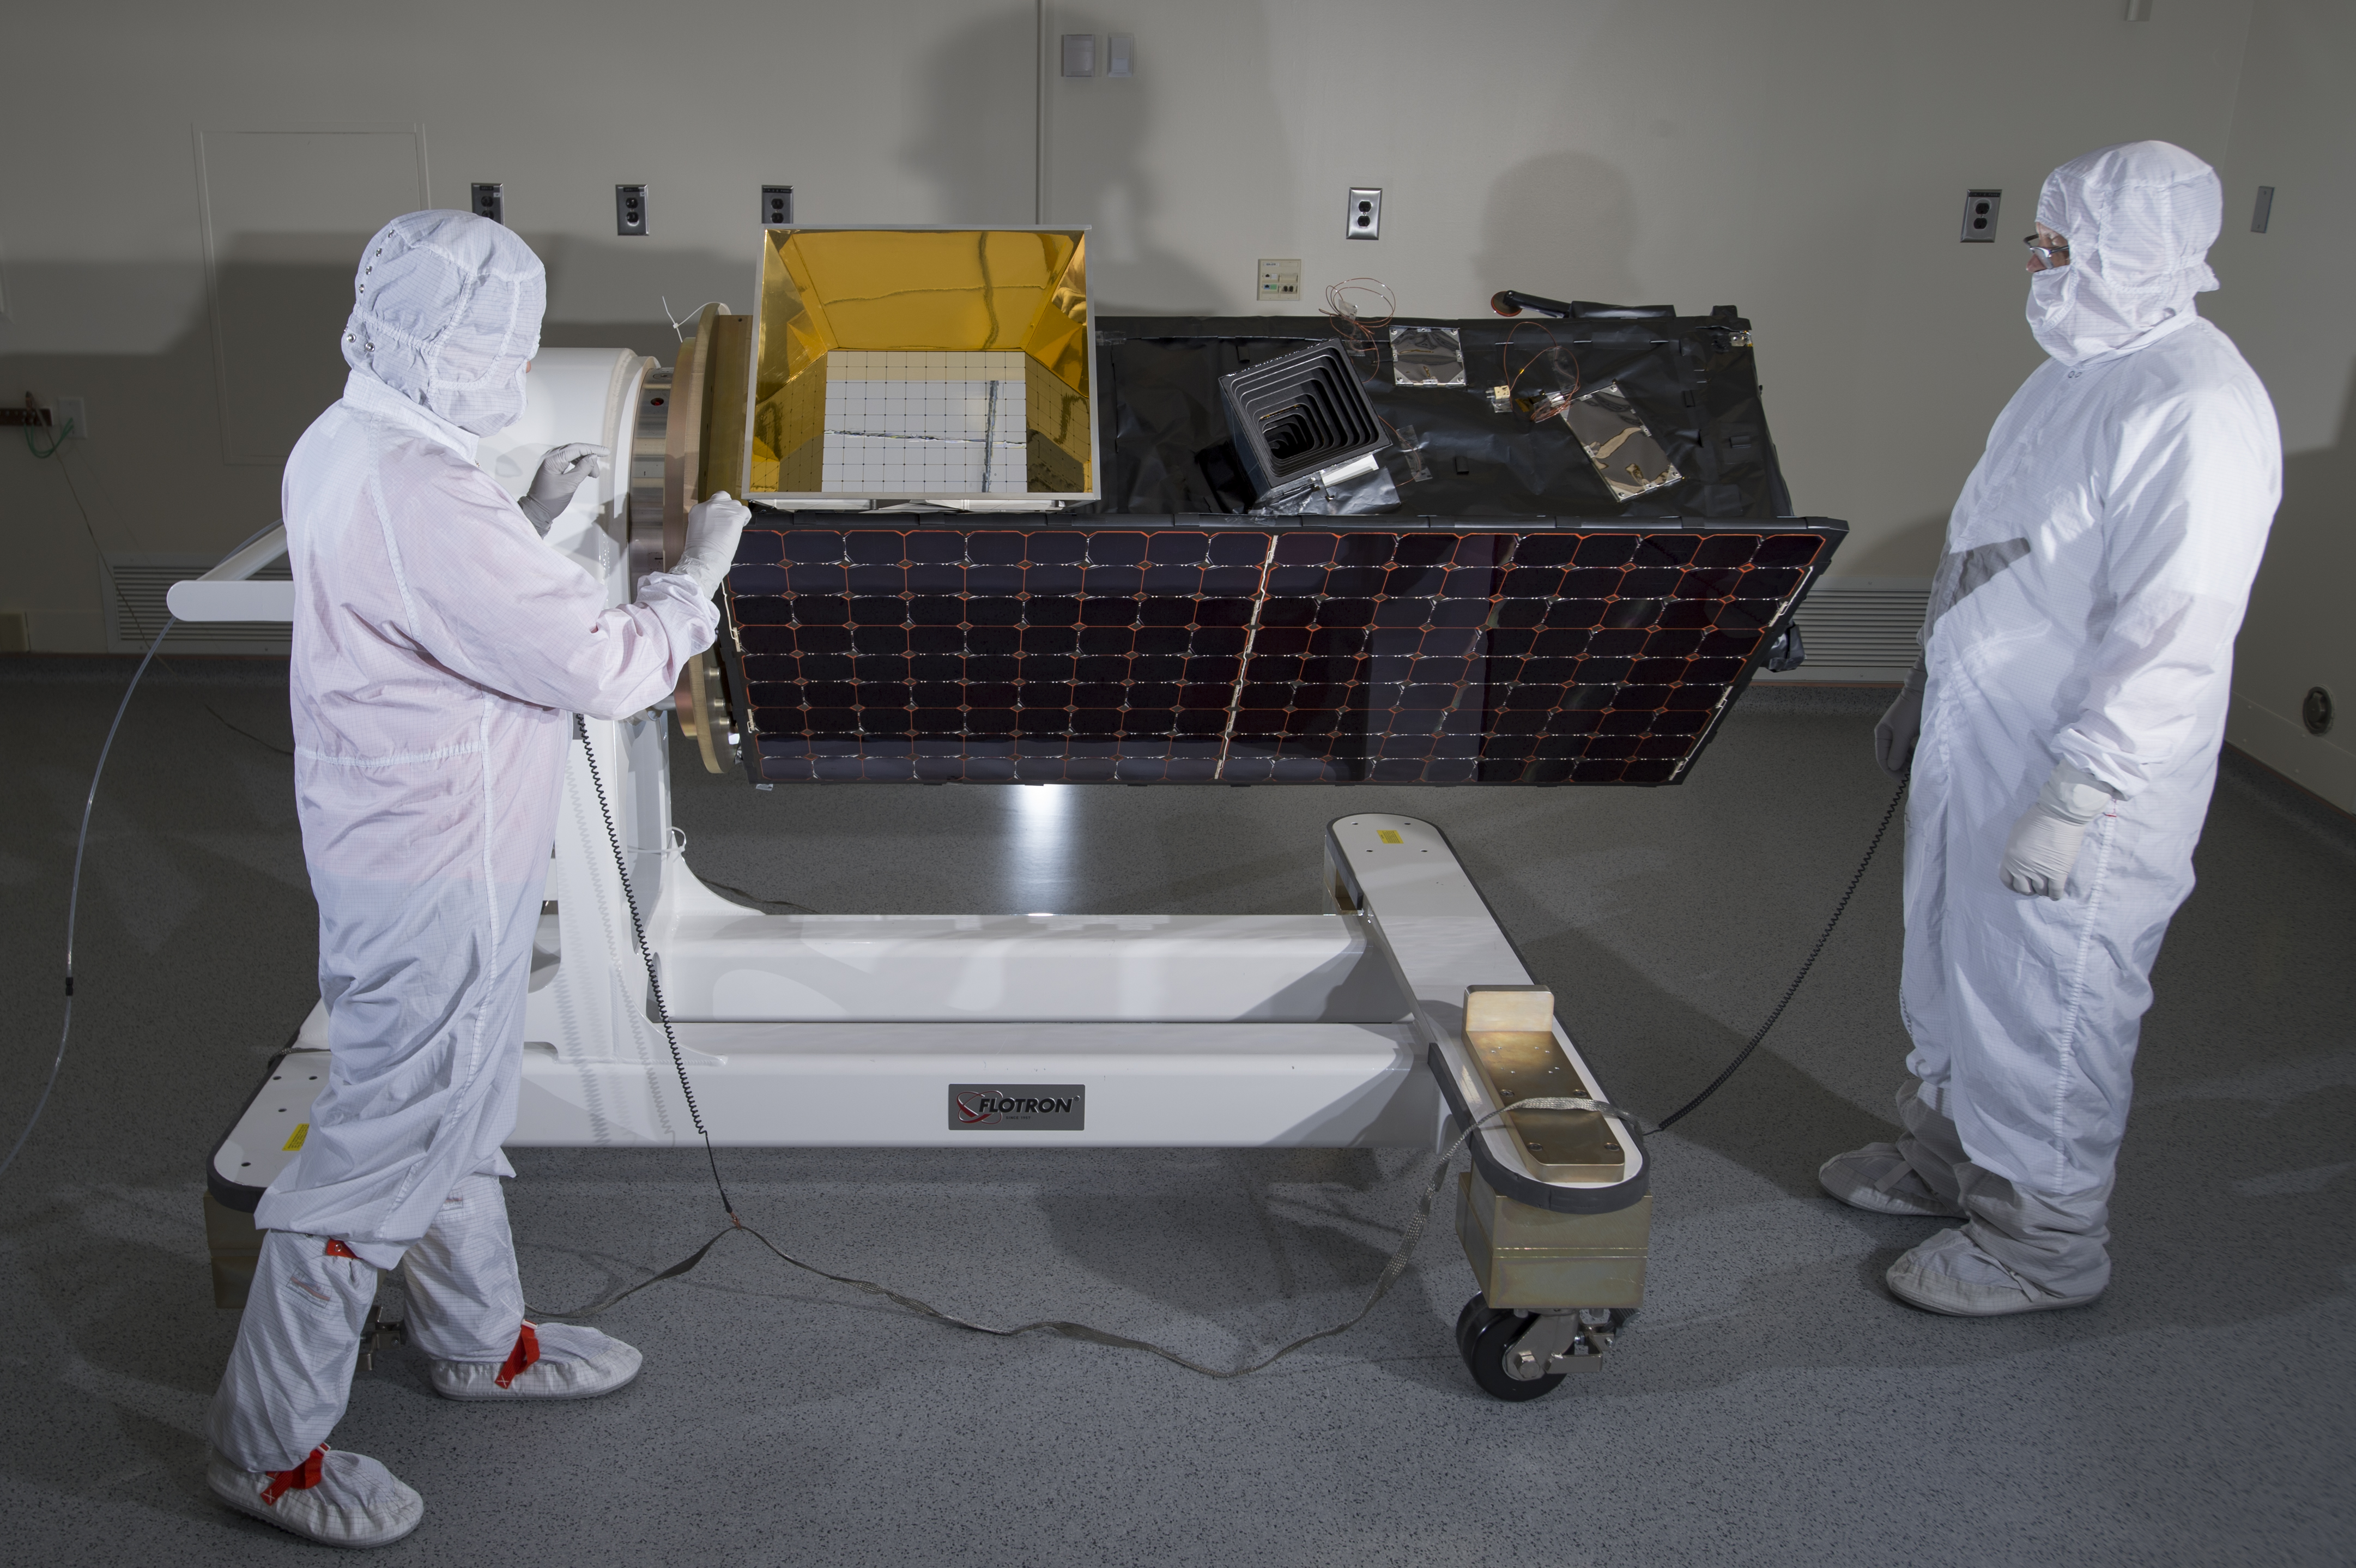 An engineer inspects SensorSat prior to thermal-vacuum testing. Photo: Glen Cooper